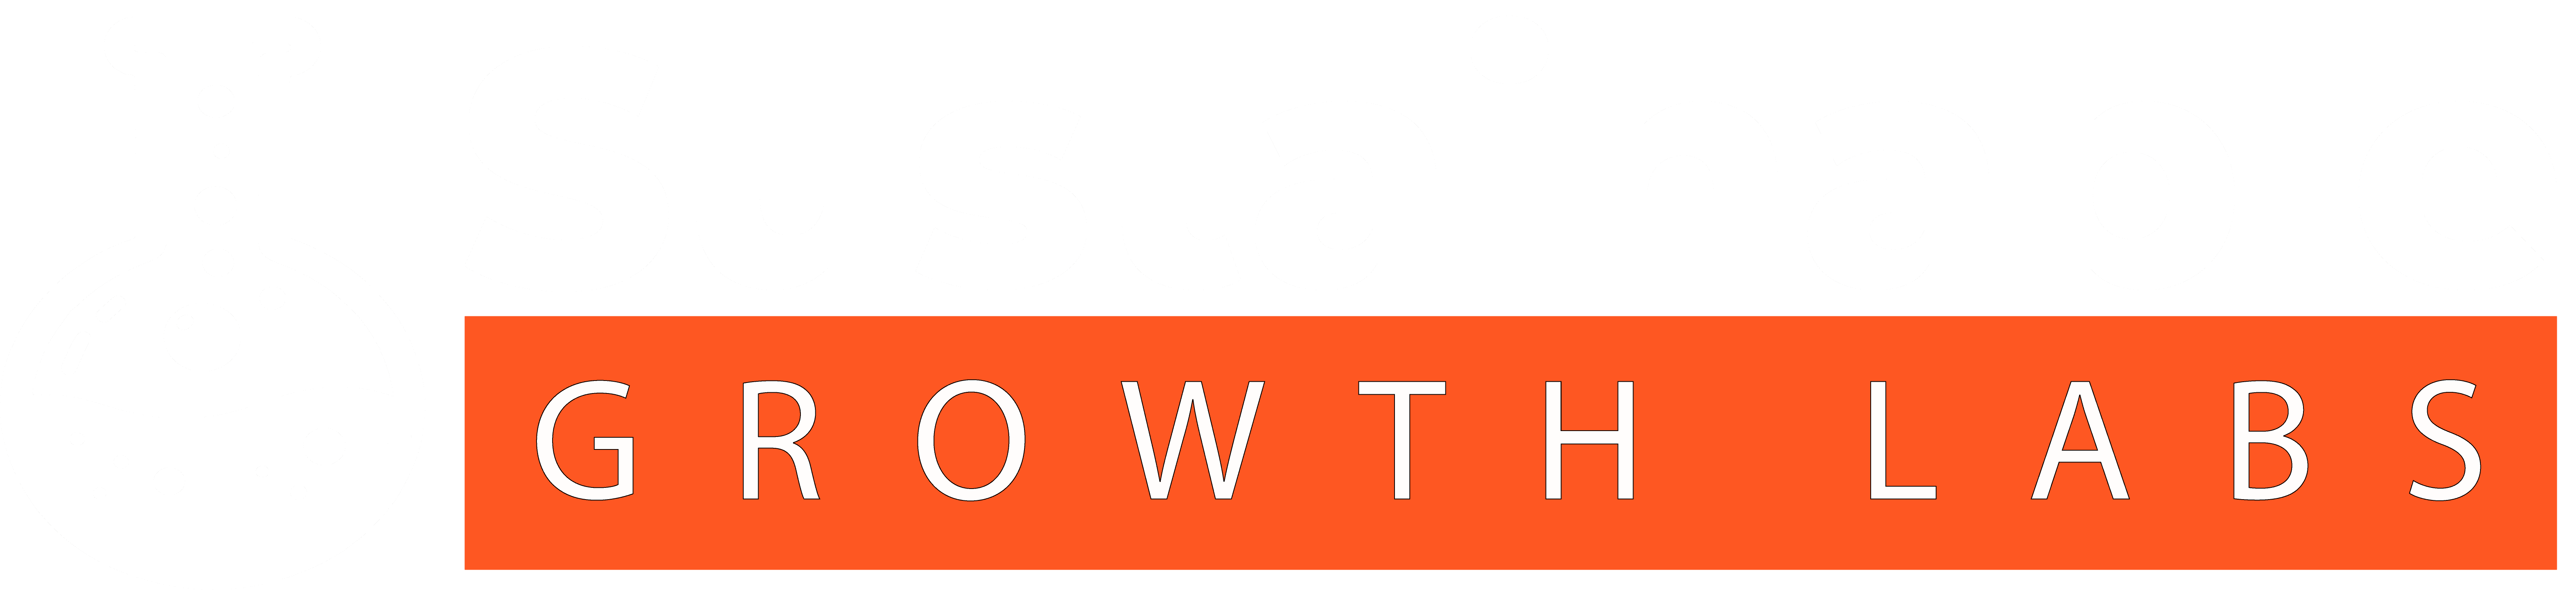 Sustainable Growth Labs